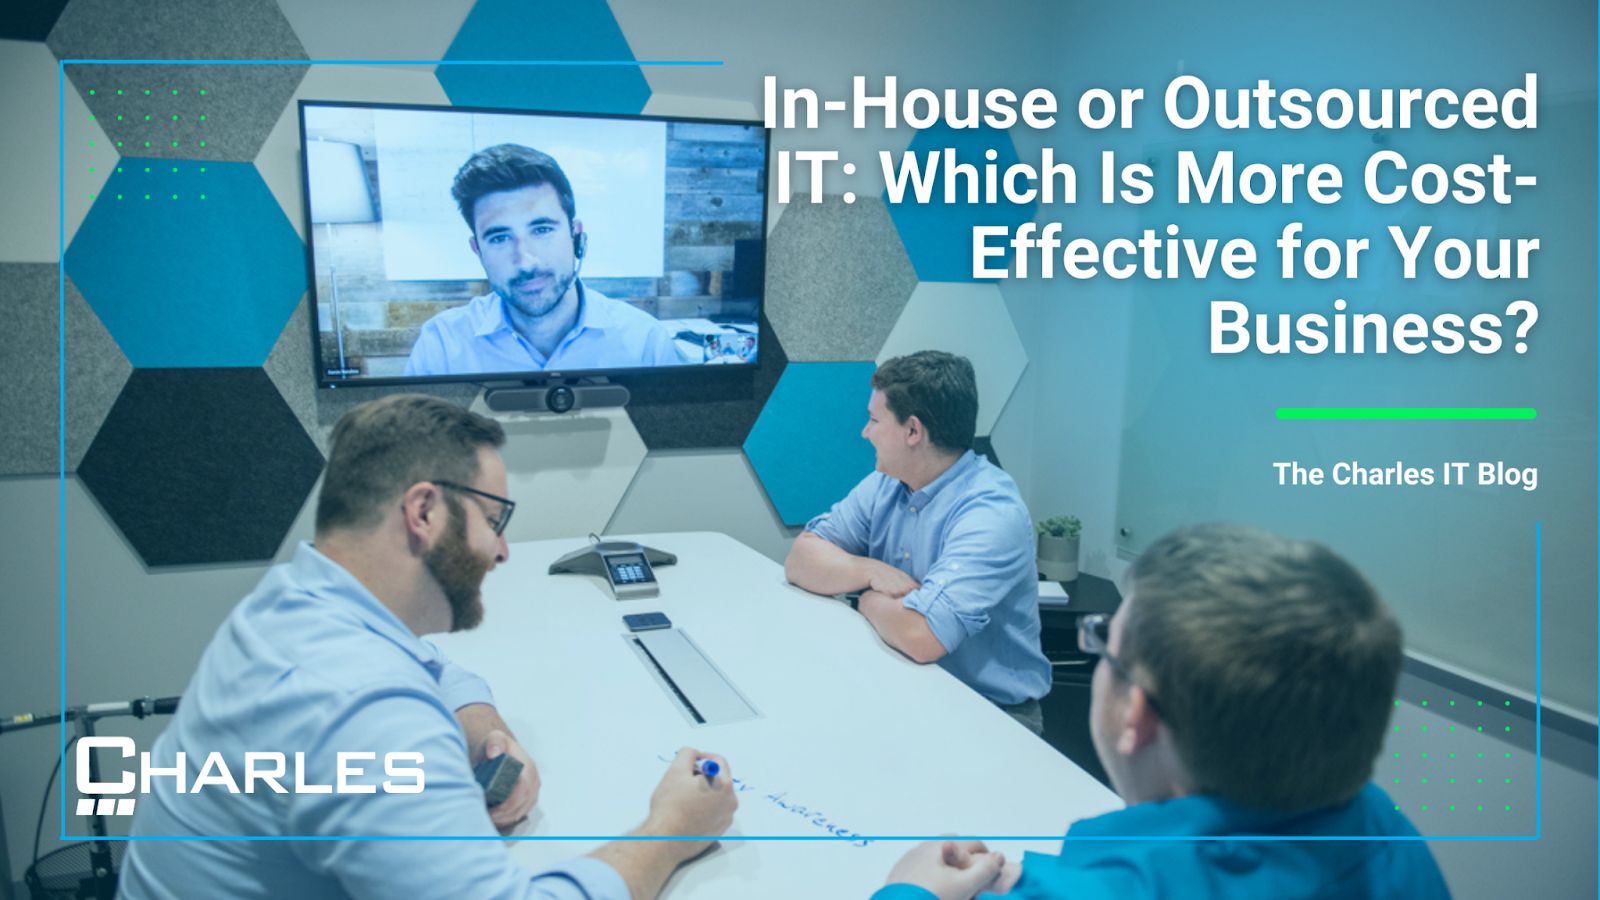 In-House or Outsourced IT: Which Is More Cost-Effective for Your Business?